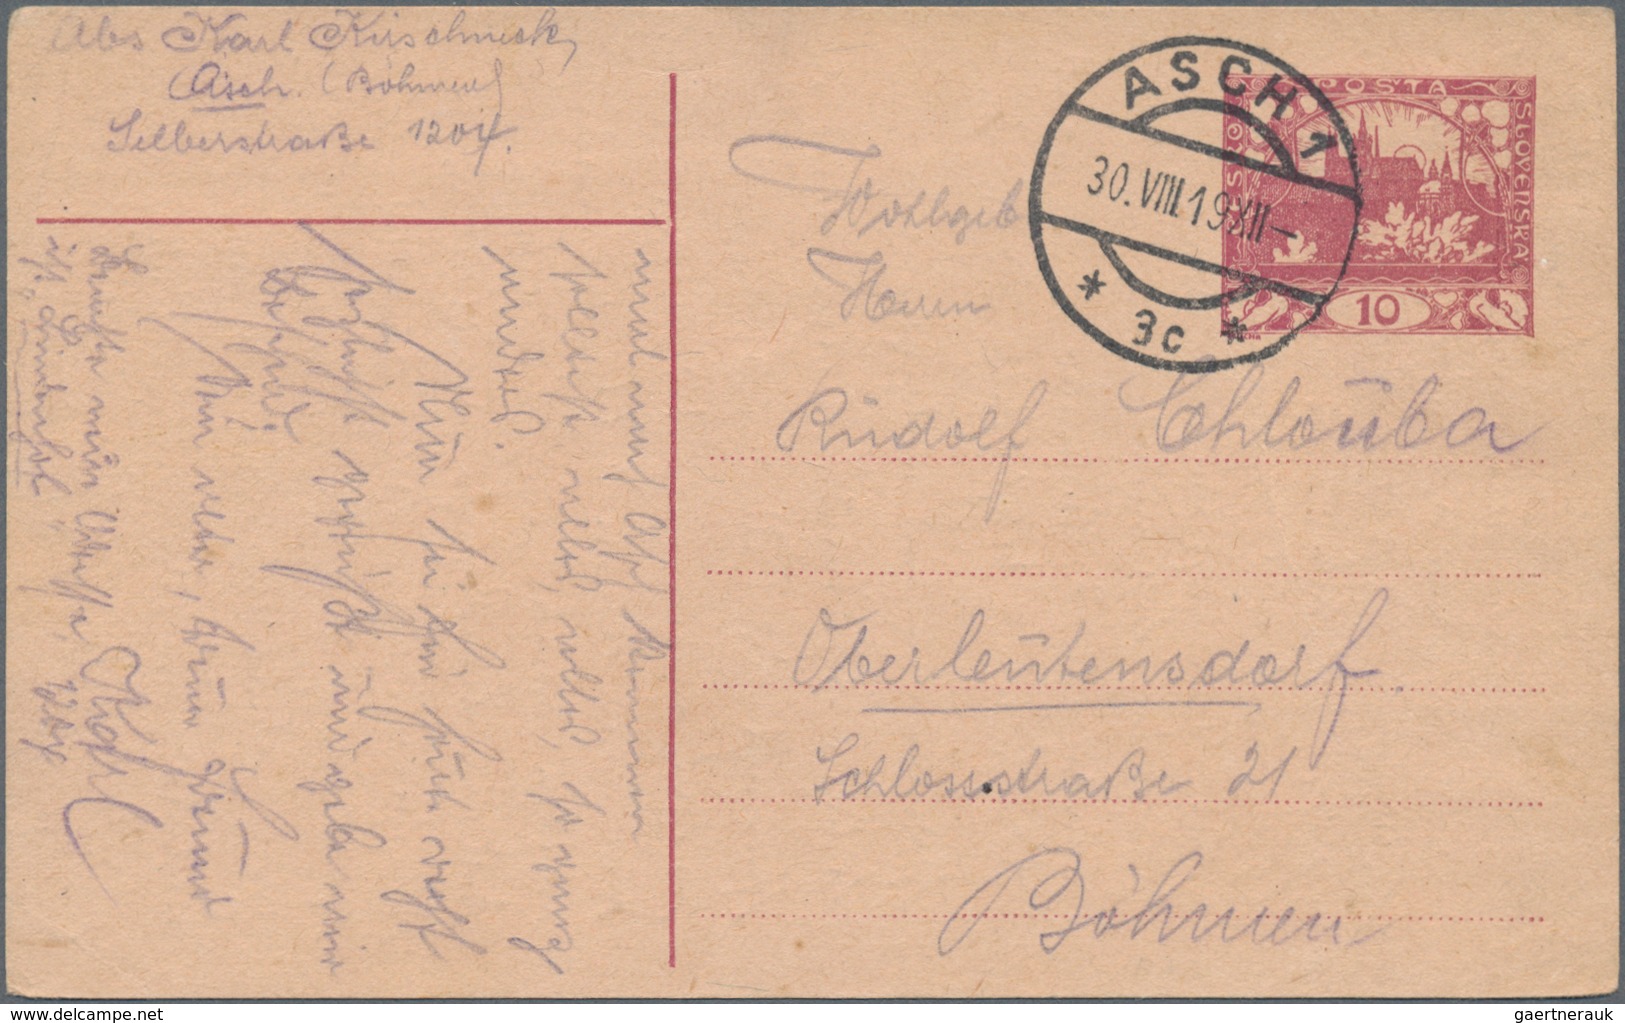 Tschechoslowakei: 1919/86, holding of ca. 150 letters, cards, picture postcards, a franked consignme